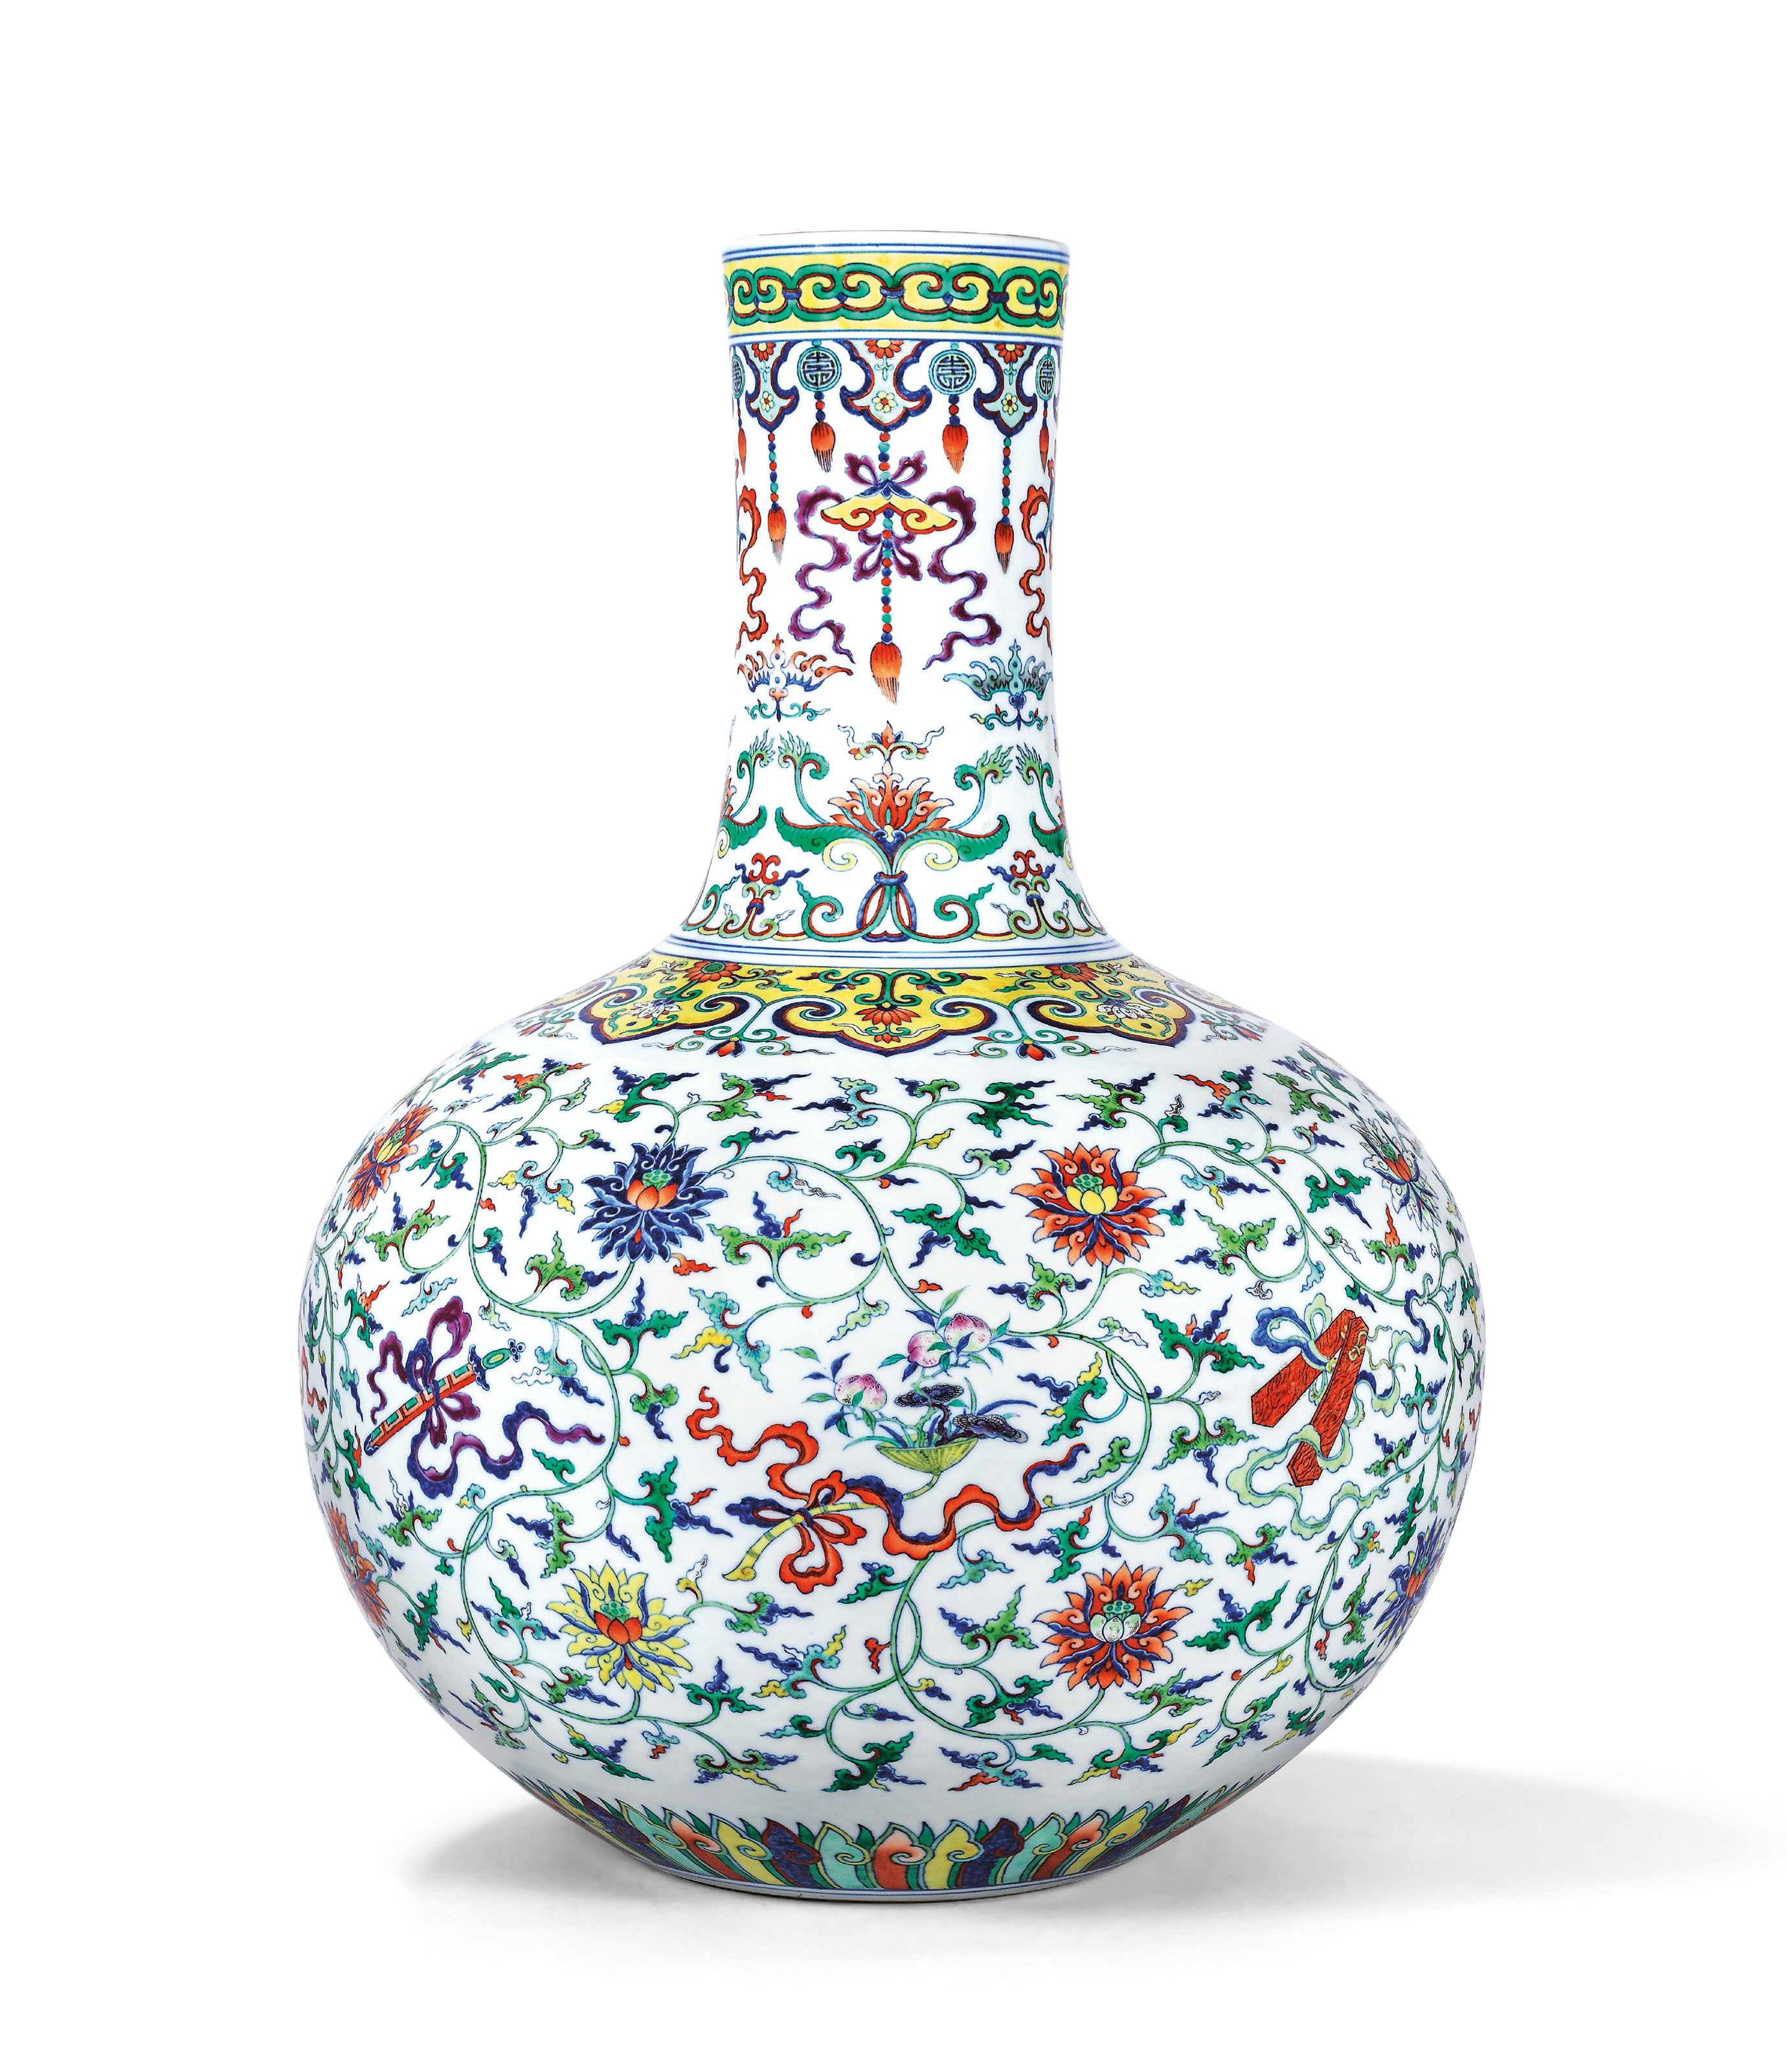 29 Stunning Macys Waterford Vase 2024 free download macys waterford vase of philbrook museum with this rare chinese vase languished in storage at an oklahoma museum for over a decade then it sold for 14 5 million